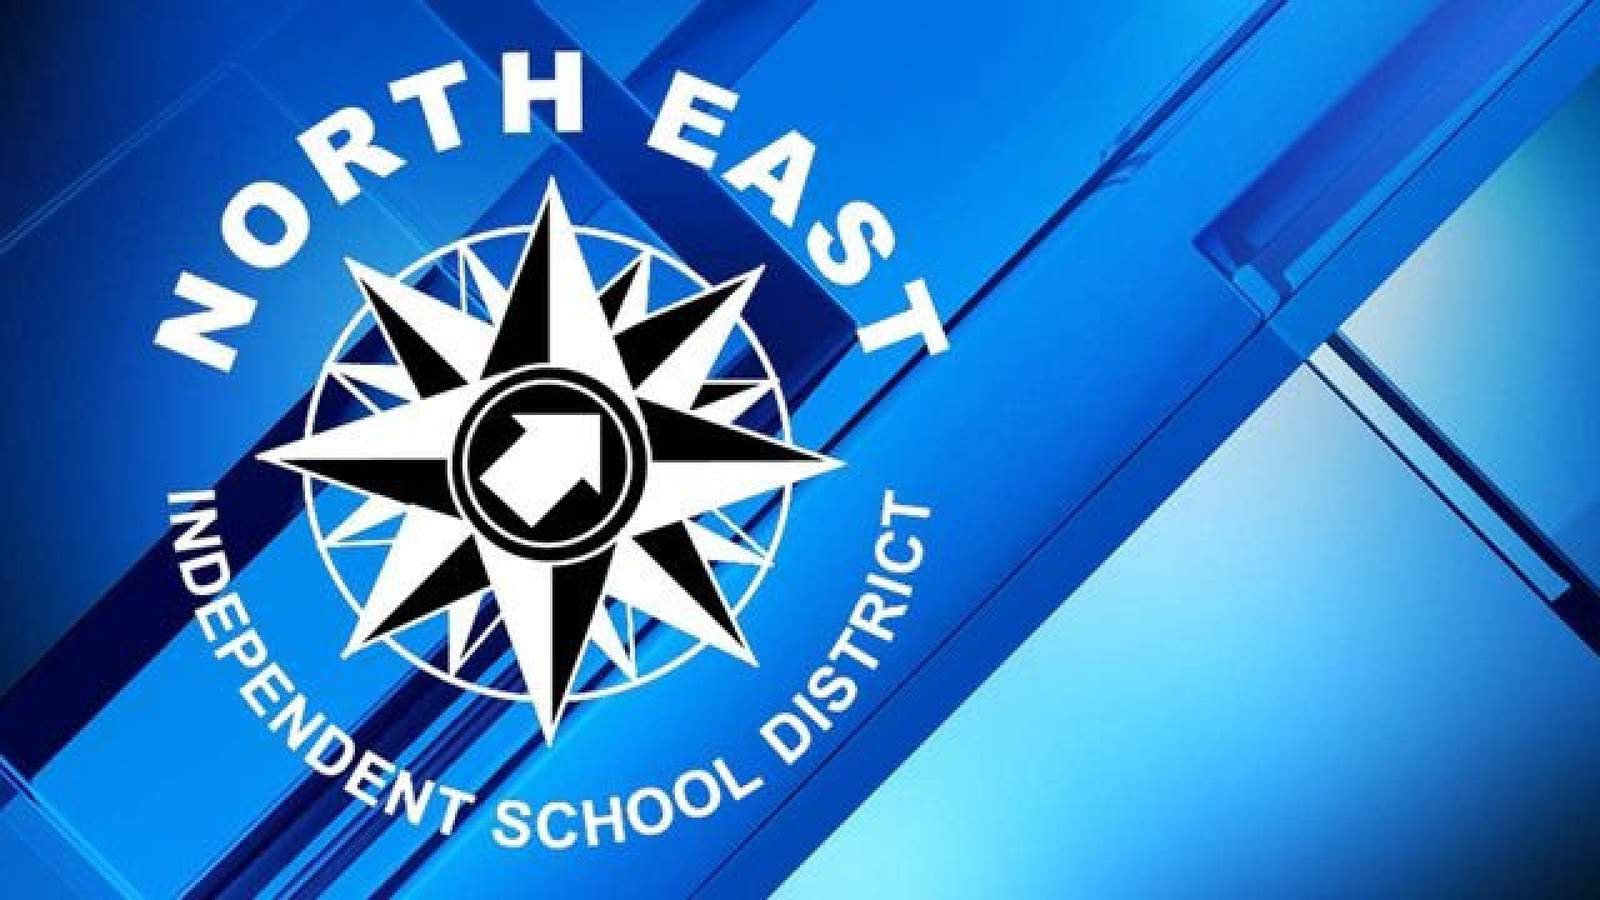 NEISD to hold COVID-19 vaccination clinic for students 18 and older on Saturday